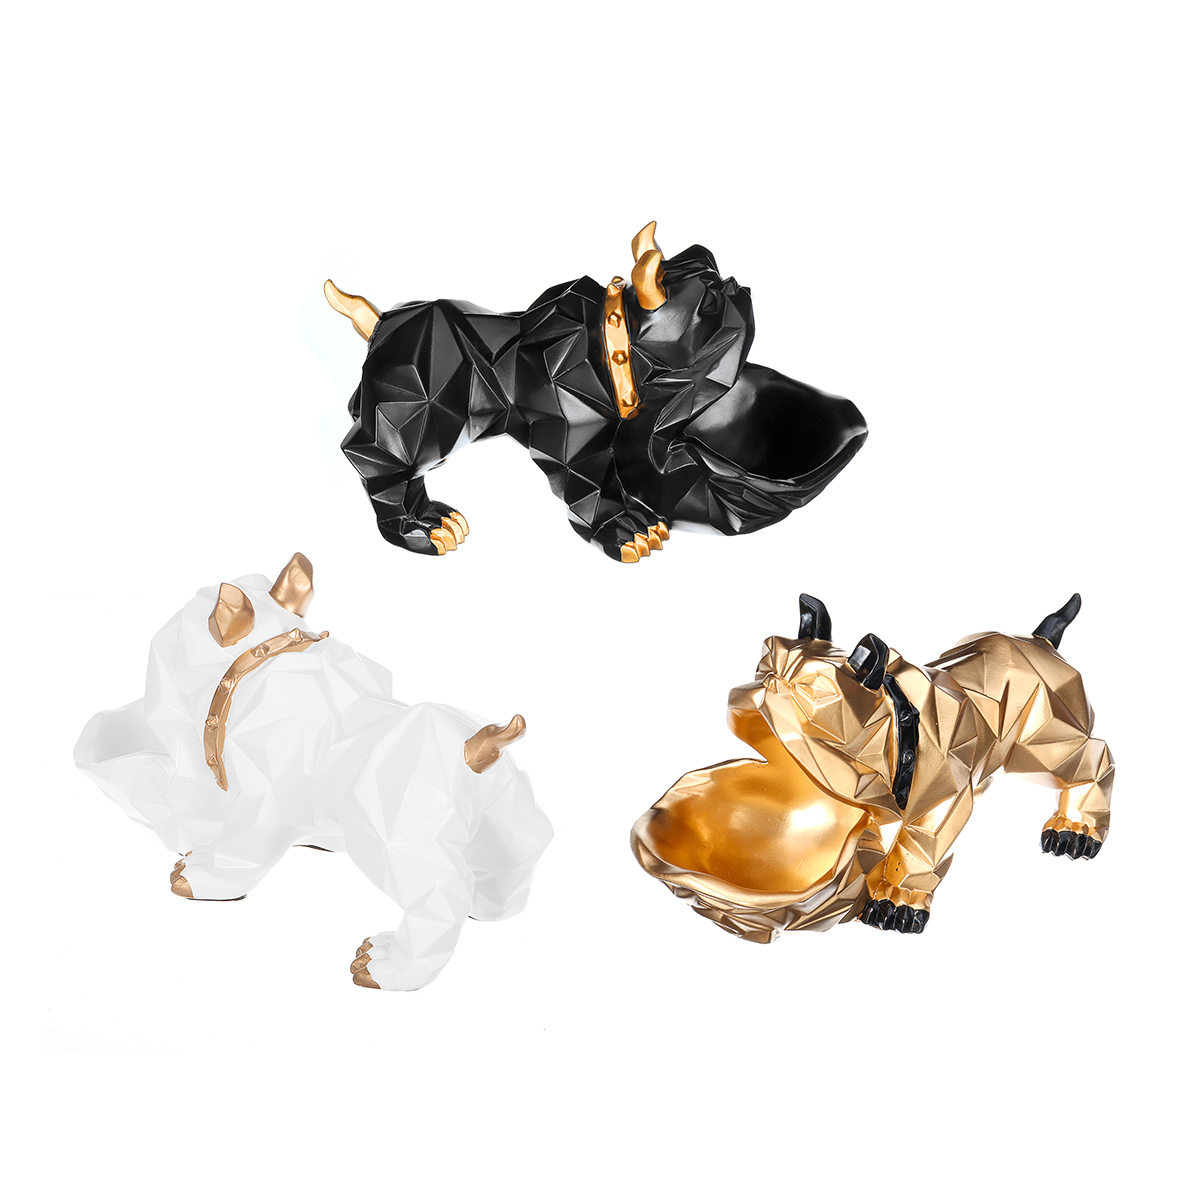 Cute-Dog-Figurines-Statue-Resin-Sculpture-Home-Storage-Decorations-1576063-6